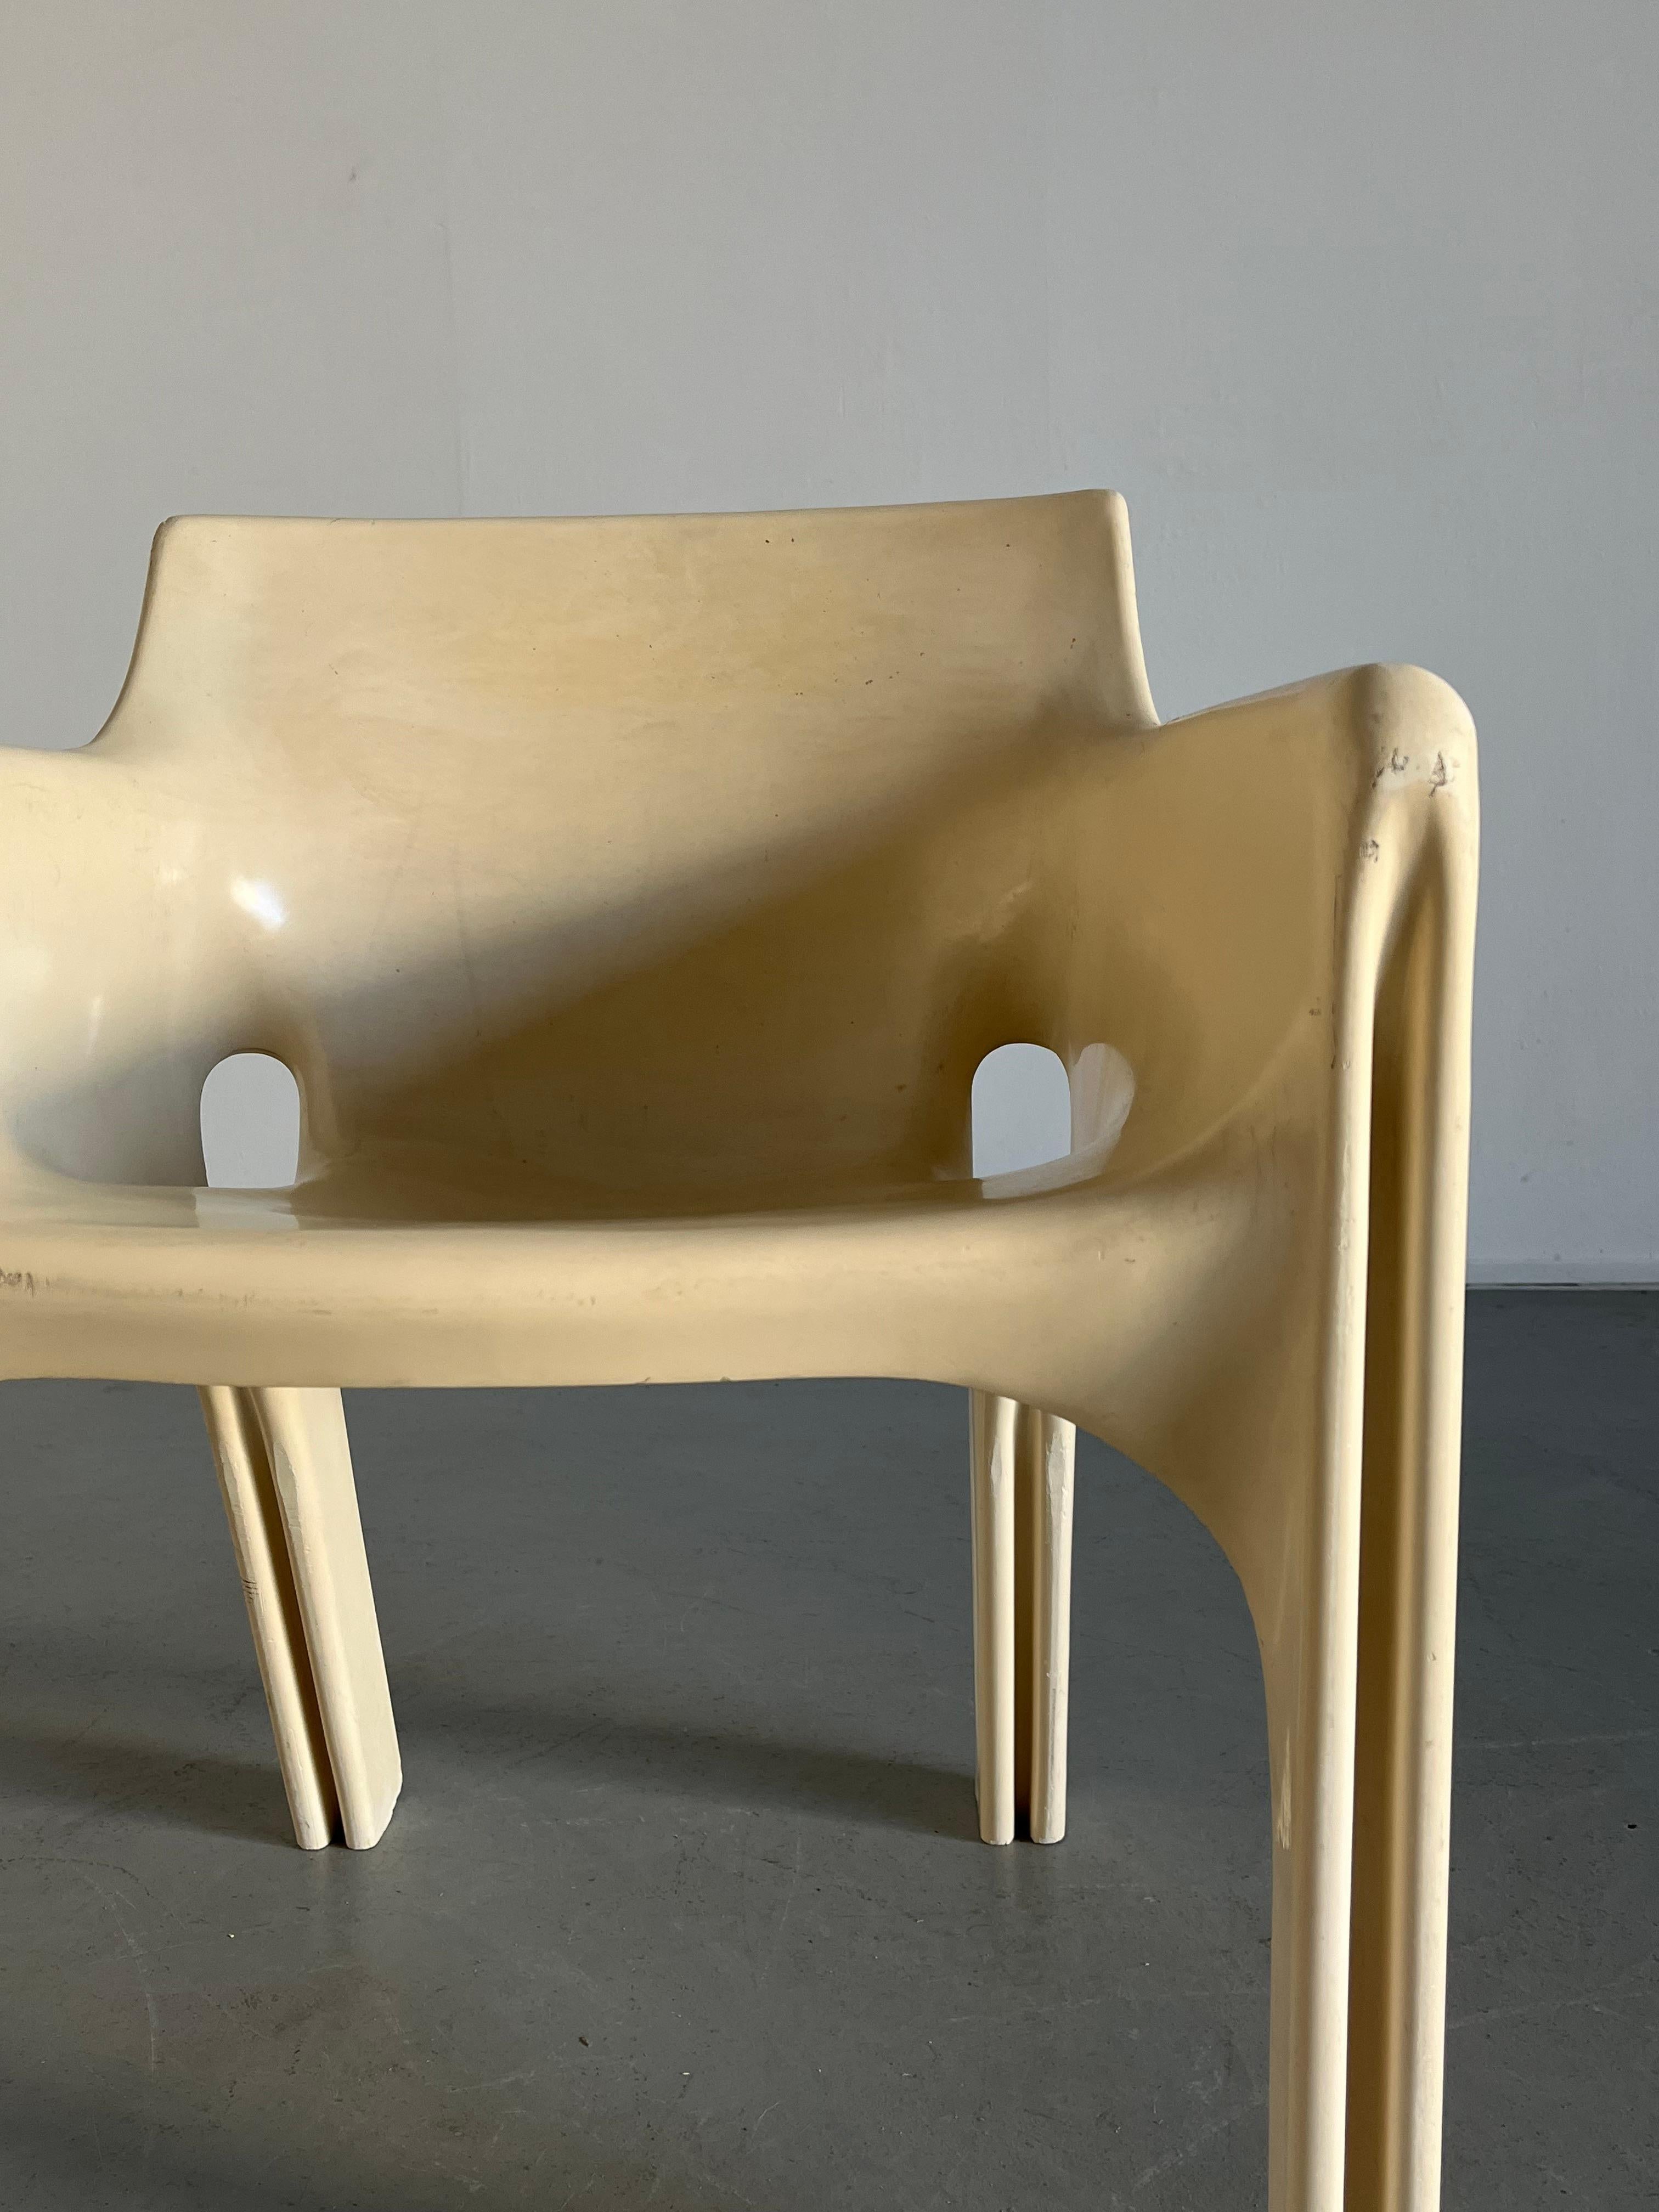 White 'Gaudi' Chair by Vico Magistretti for Artemide, Vintage Early Model, 1970s For Sale 2